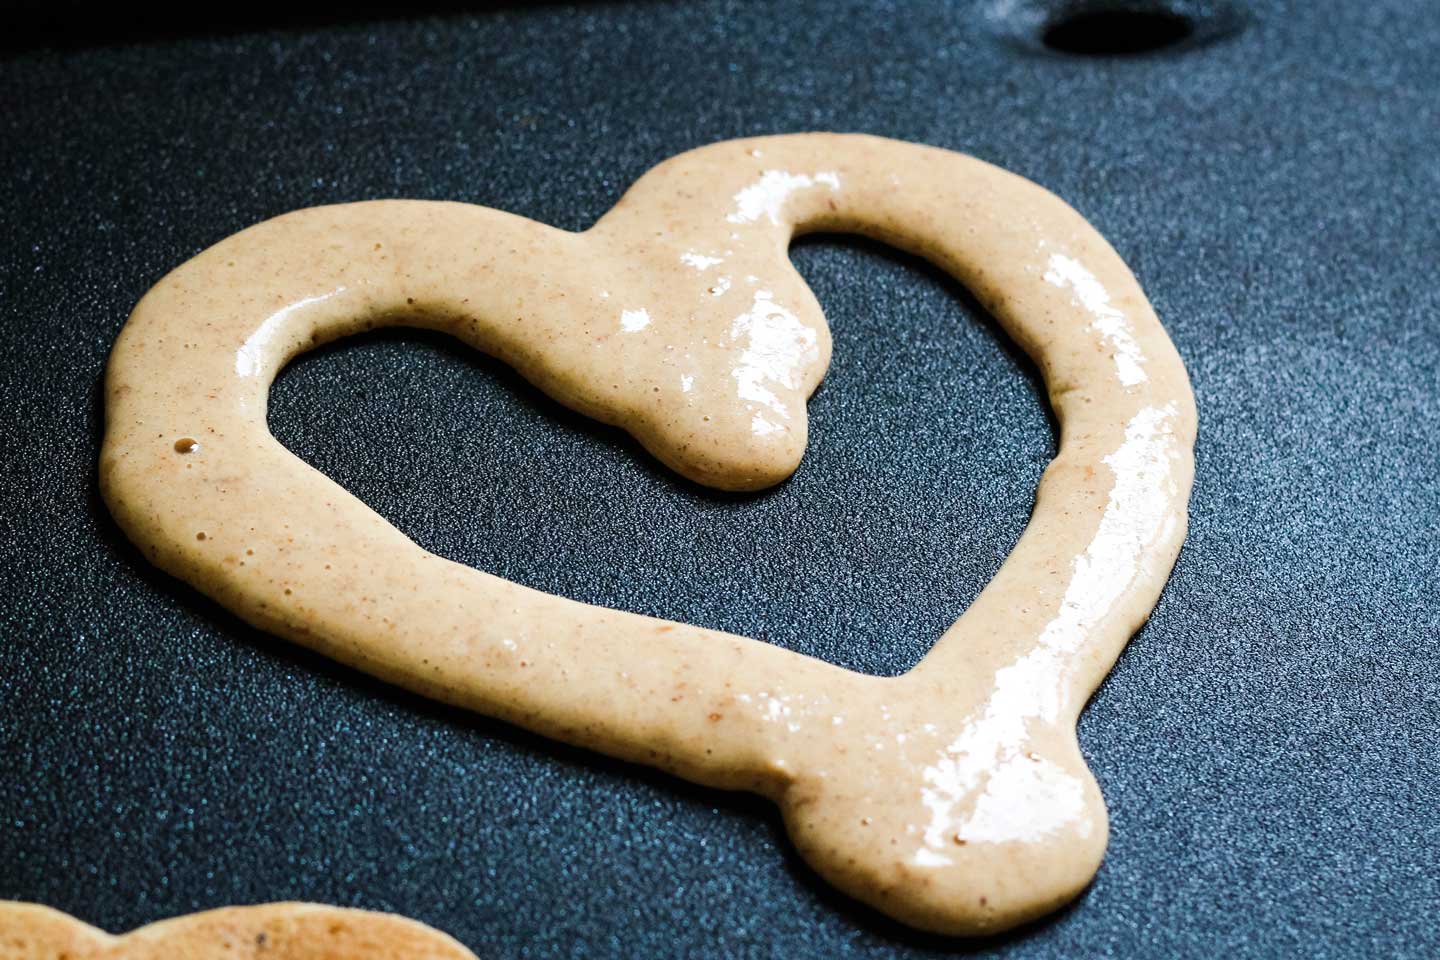 skillet with a heart-shaped pancake cooking on it